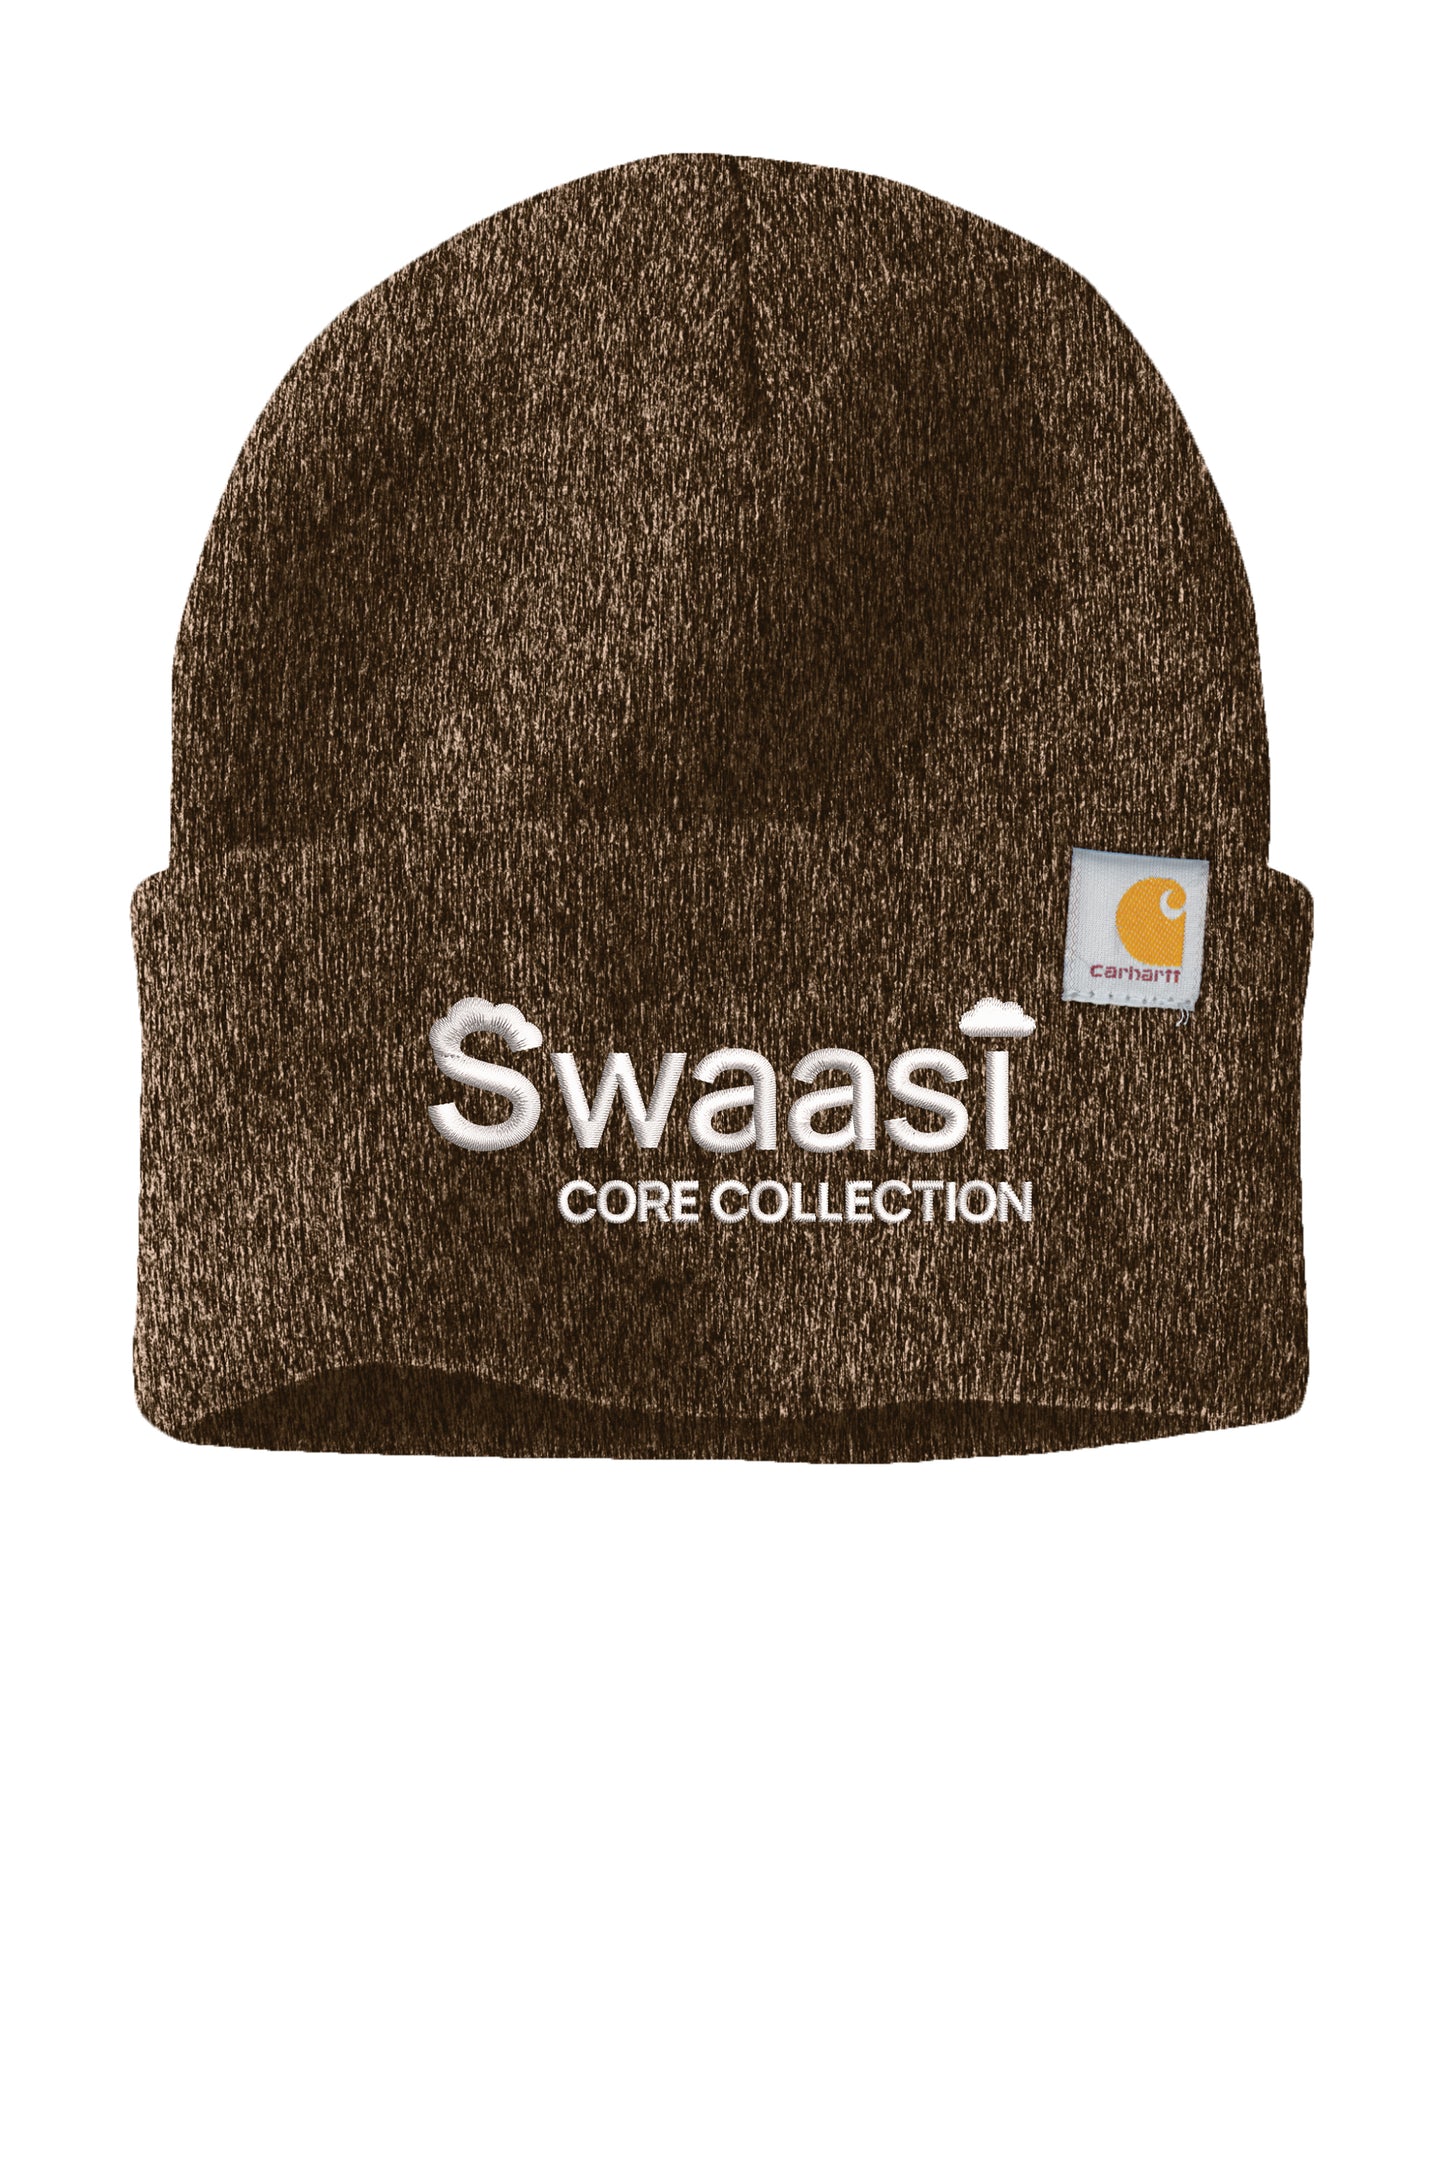 Swaasi Core - Carhartt® Watch Cap 2.0 with Embroidery Logo